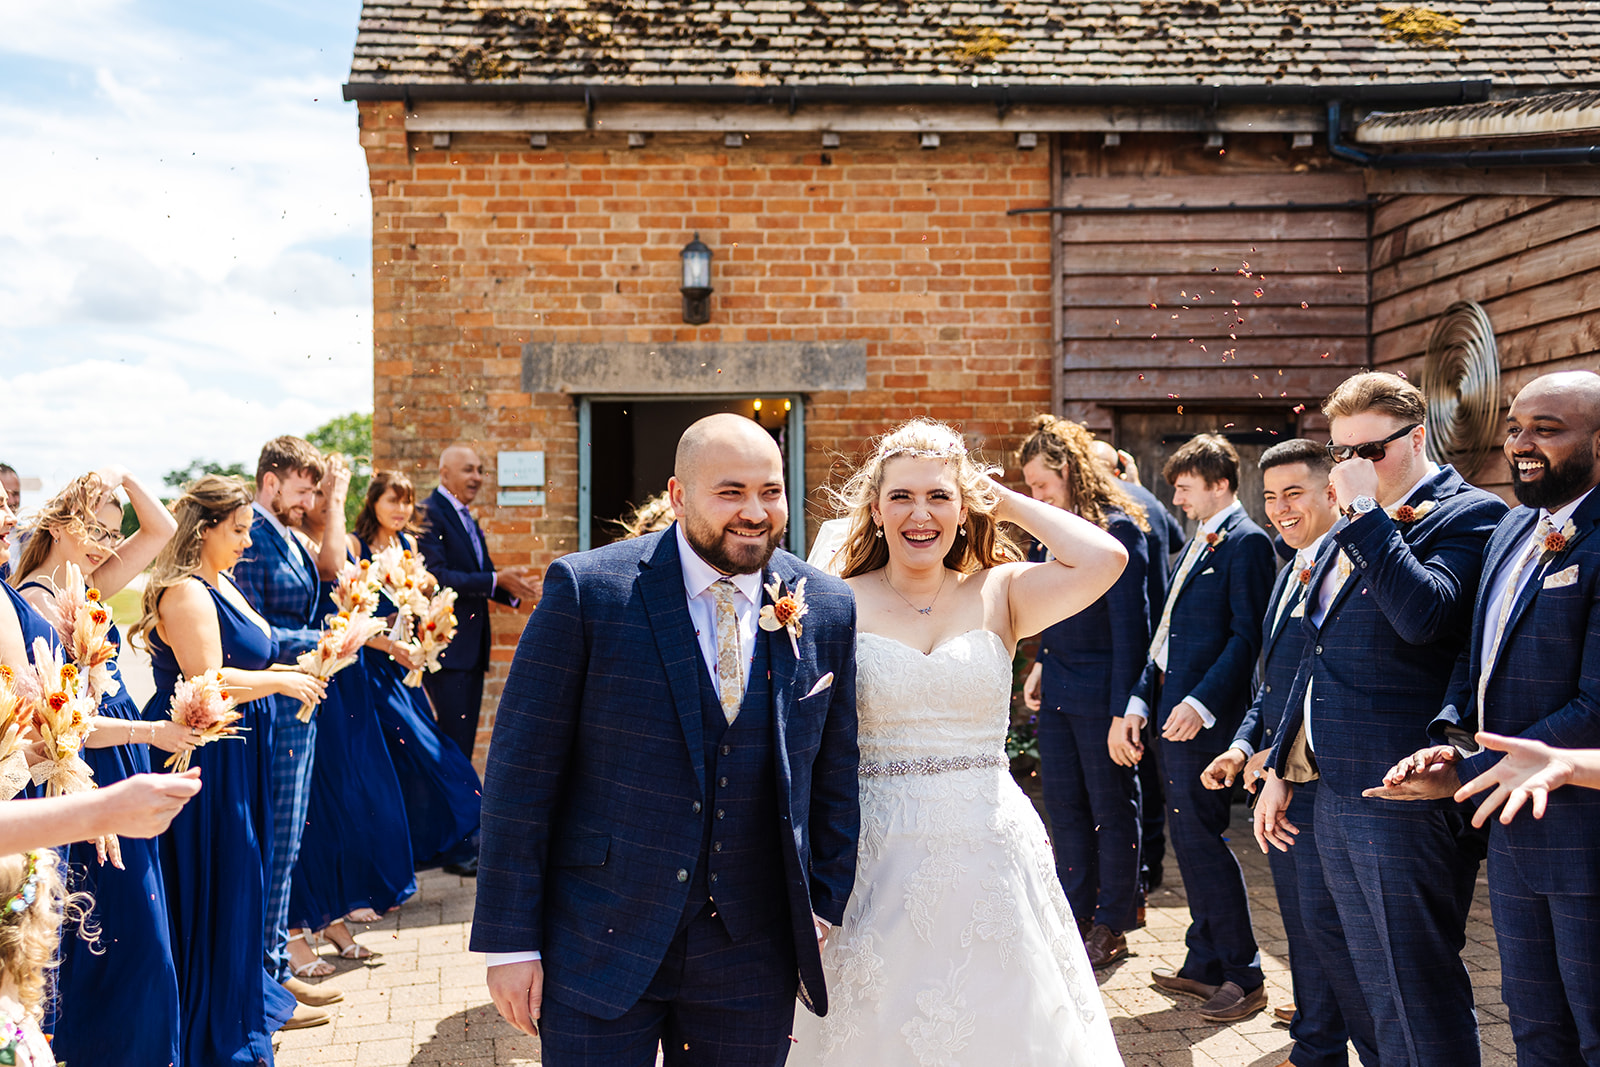 Couple exit ceremony with confetti thrown by guests 